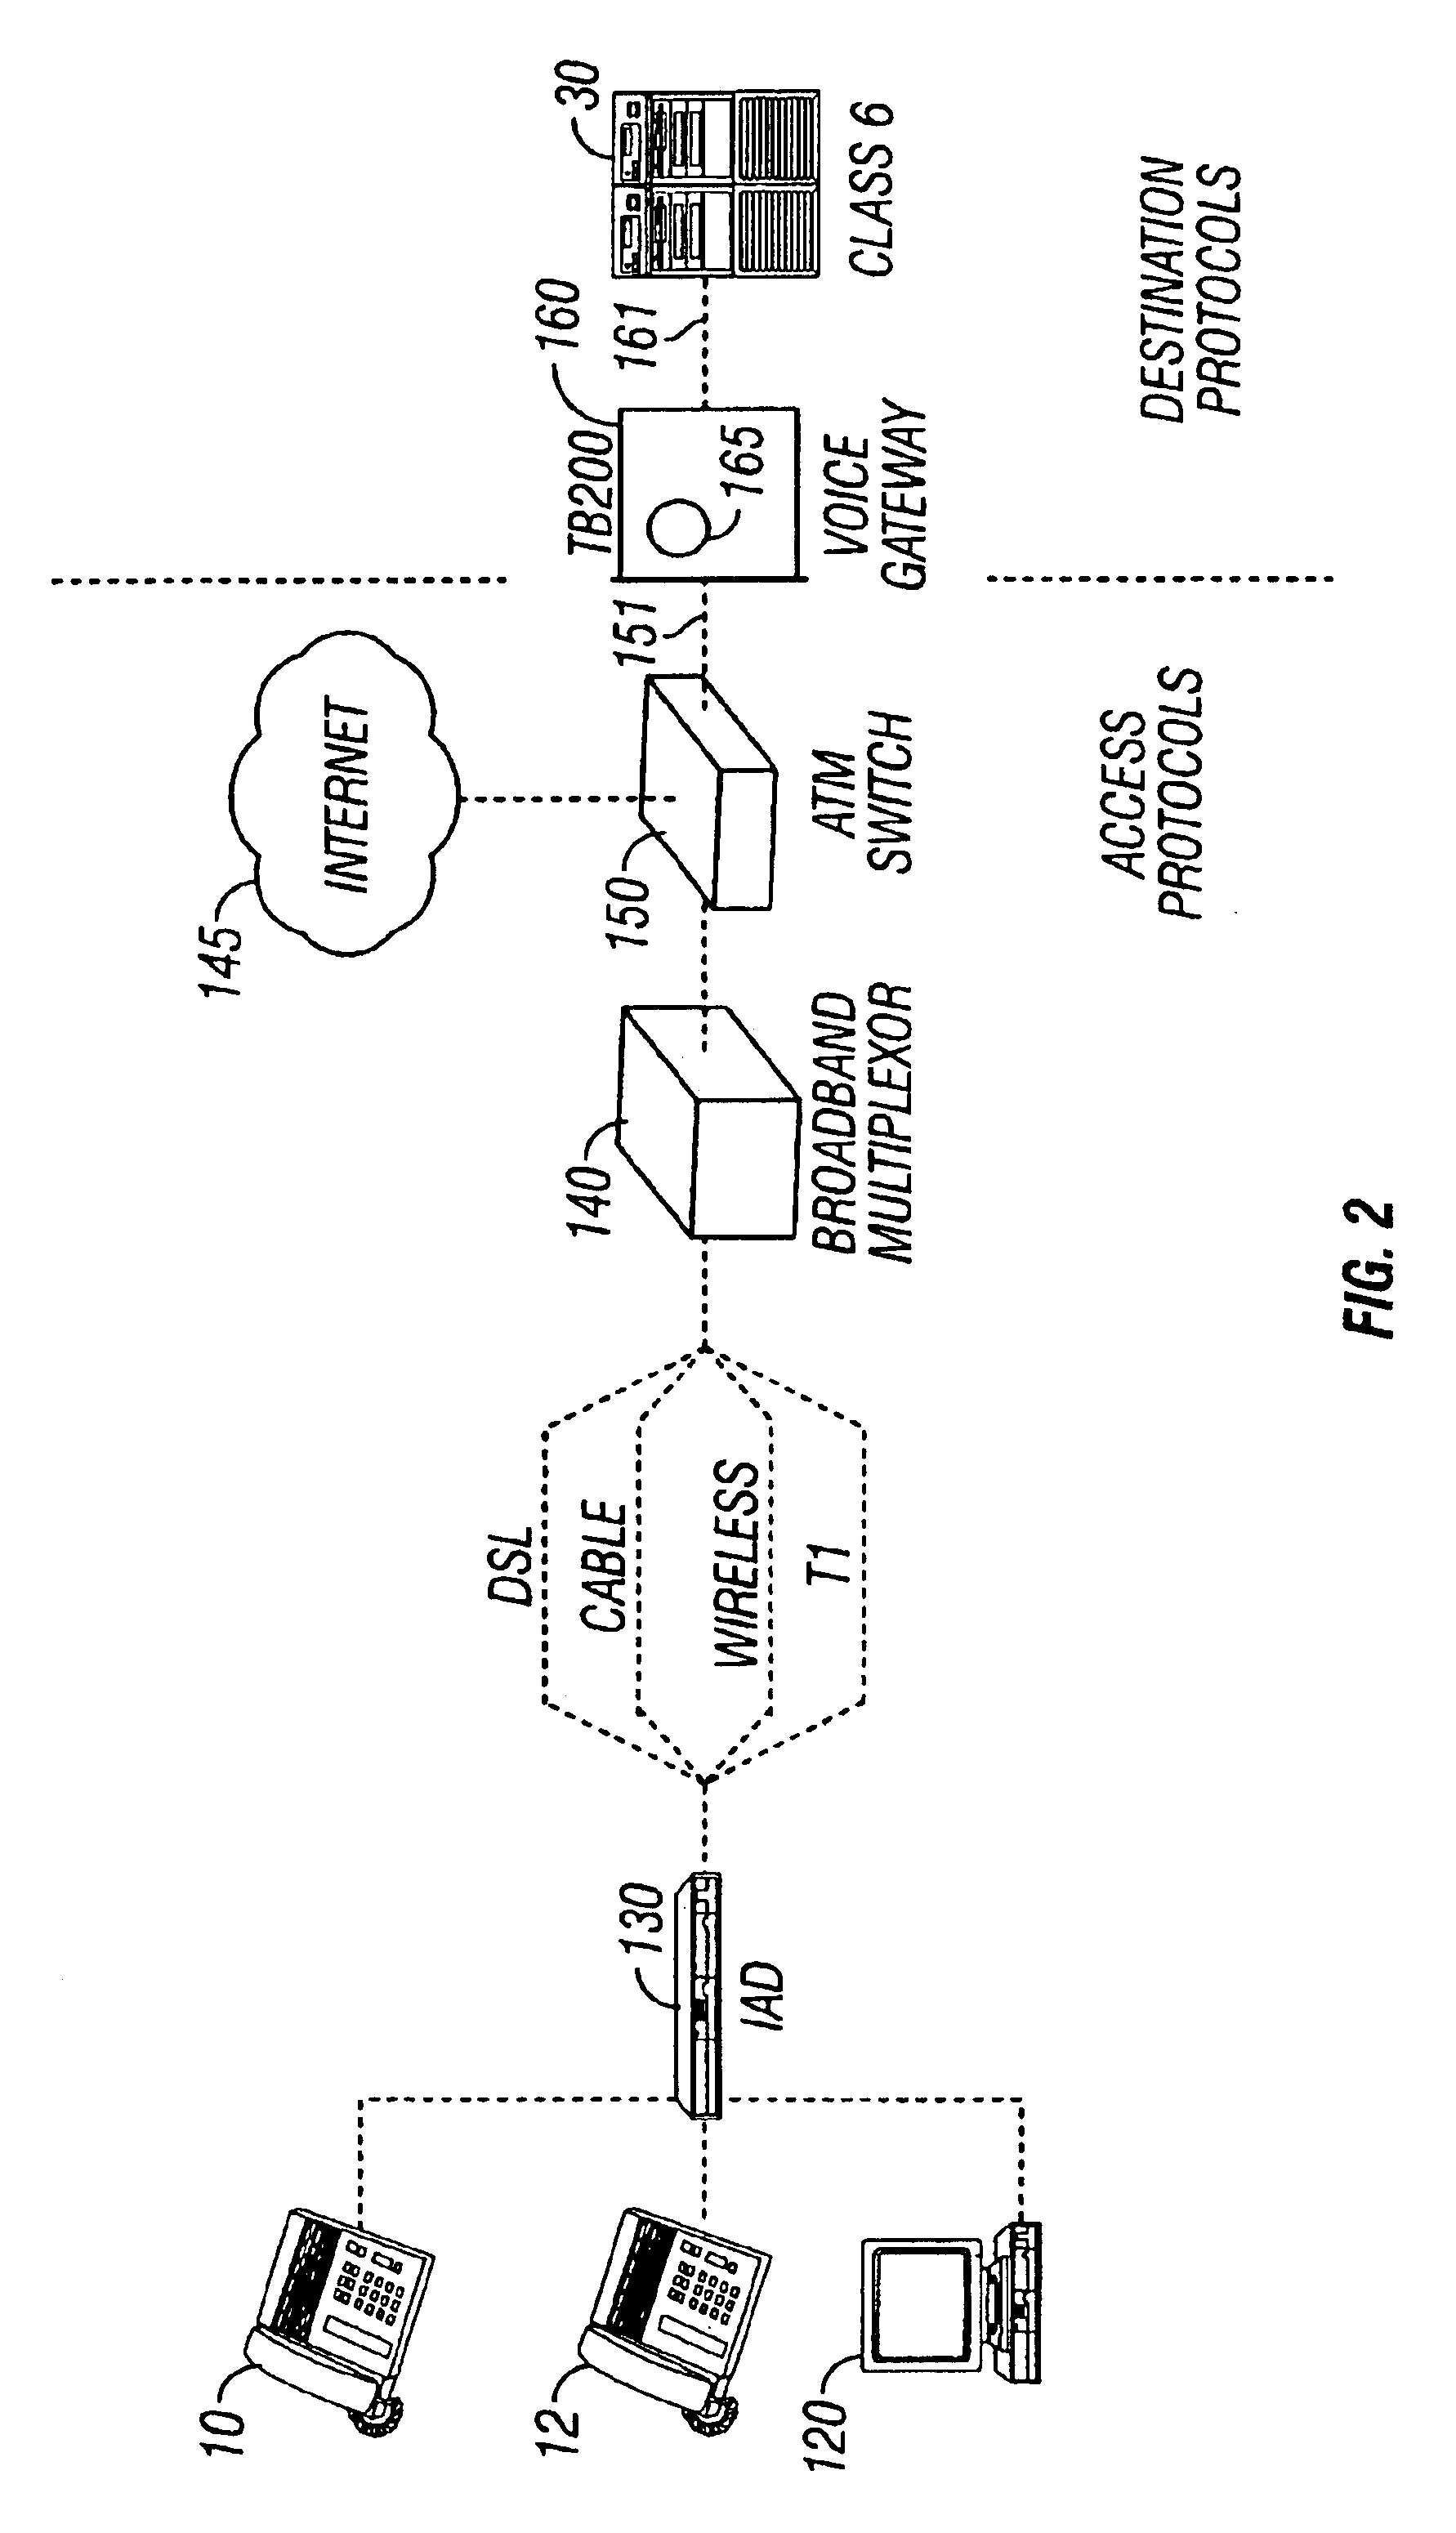 Method and apparatus for inter-working line side signaling between circuit, packet and circuit packet networks